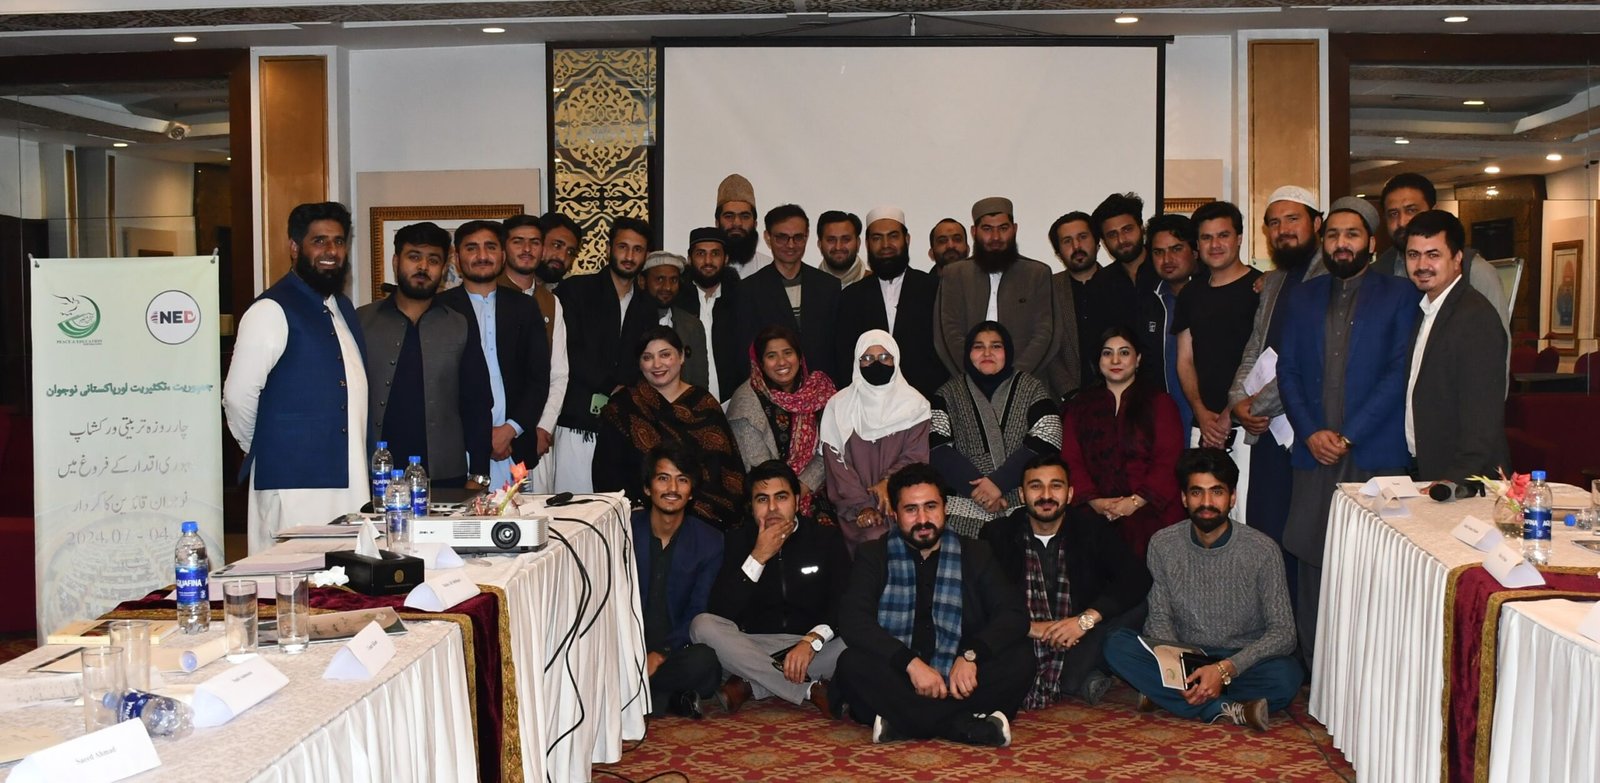 Four-Day Capacity building workshop in Peshawar for “Strengthening Networks of Youth Advocates for Democratic and Pluralistic Values in Pakistan”